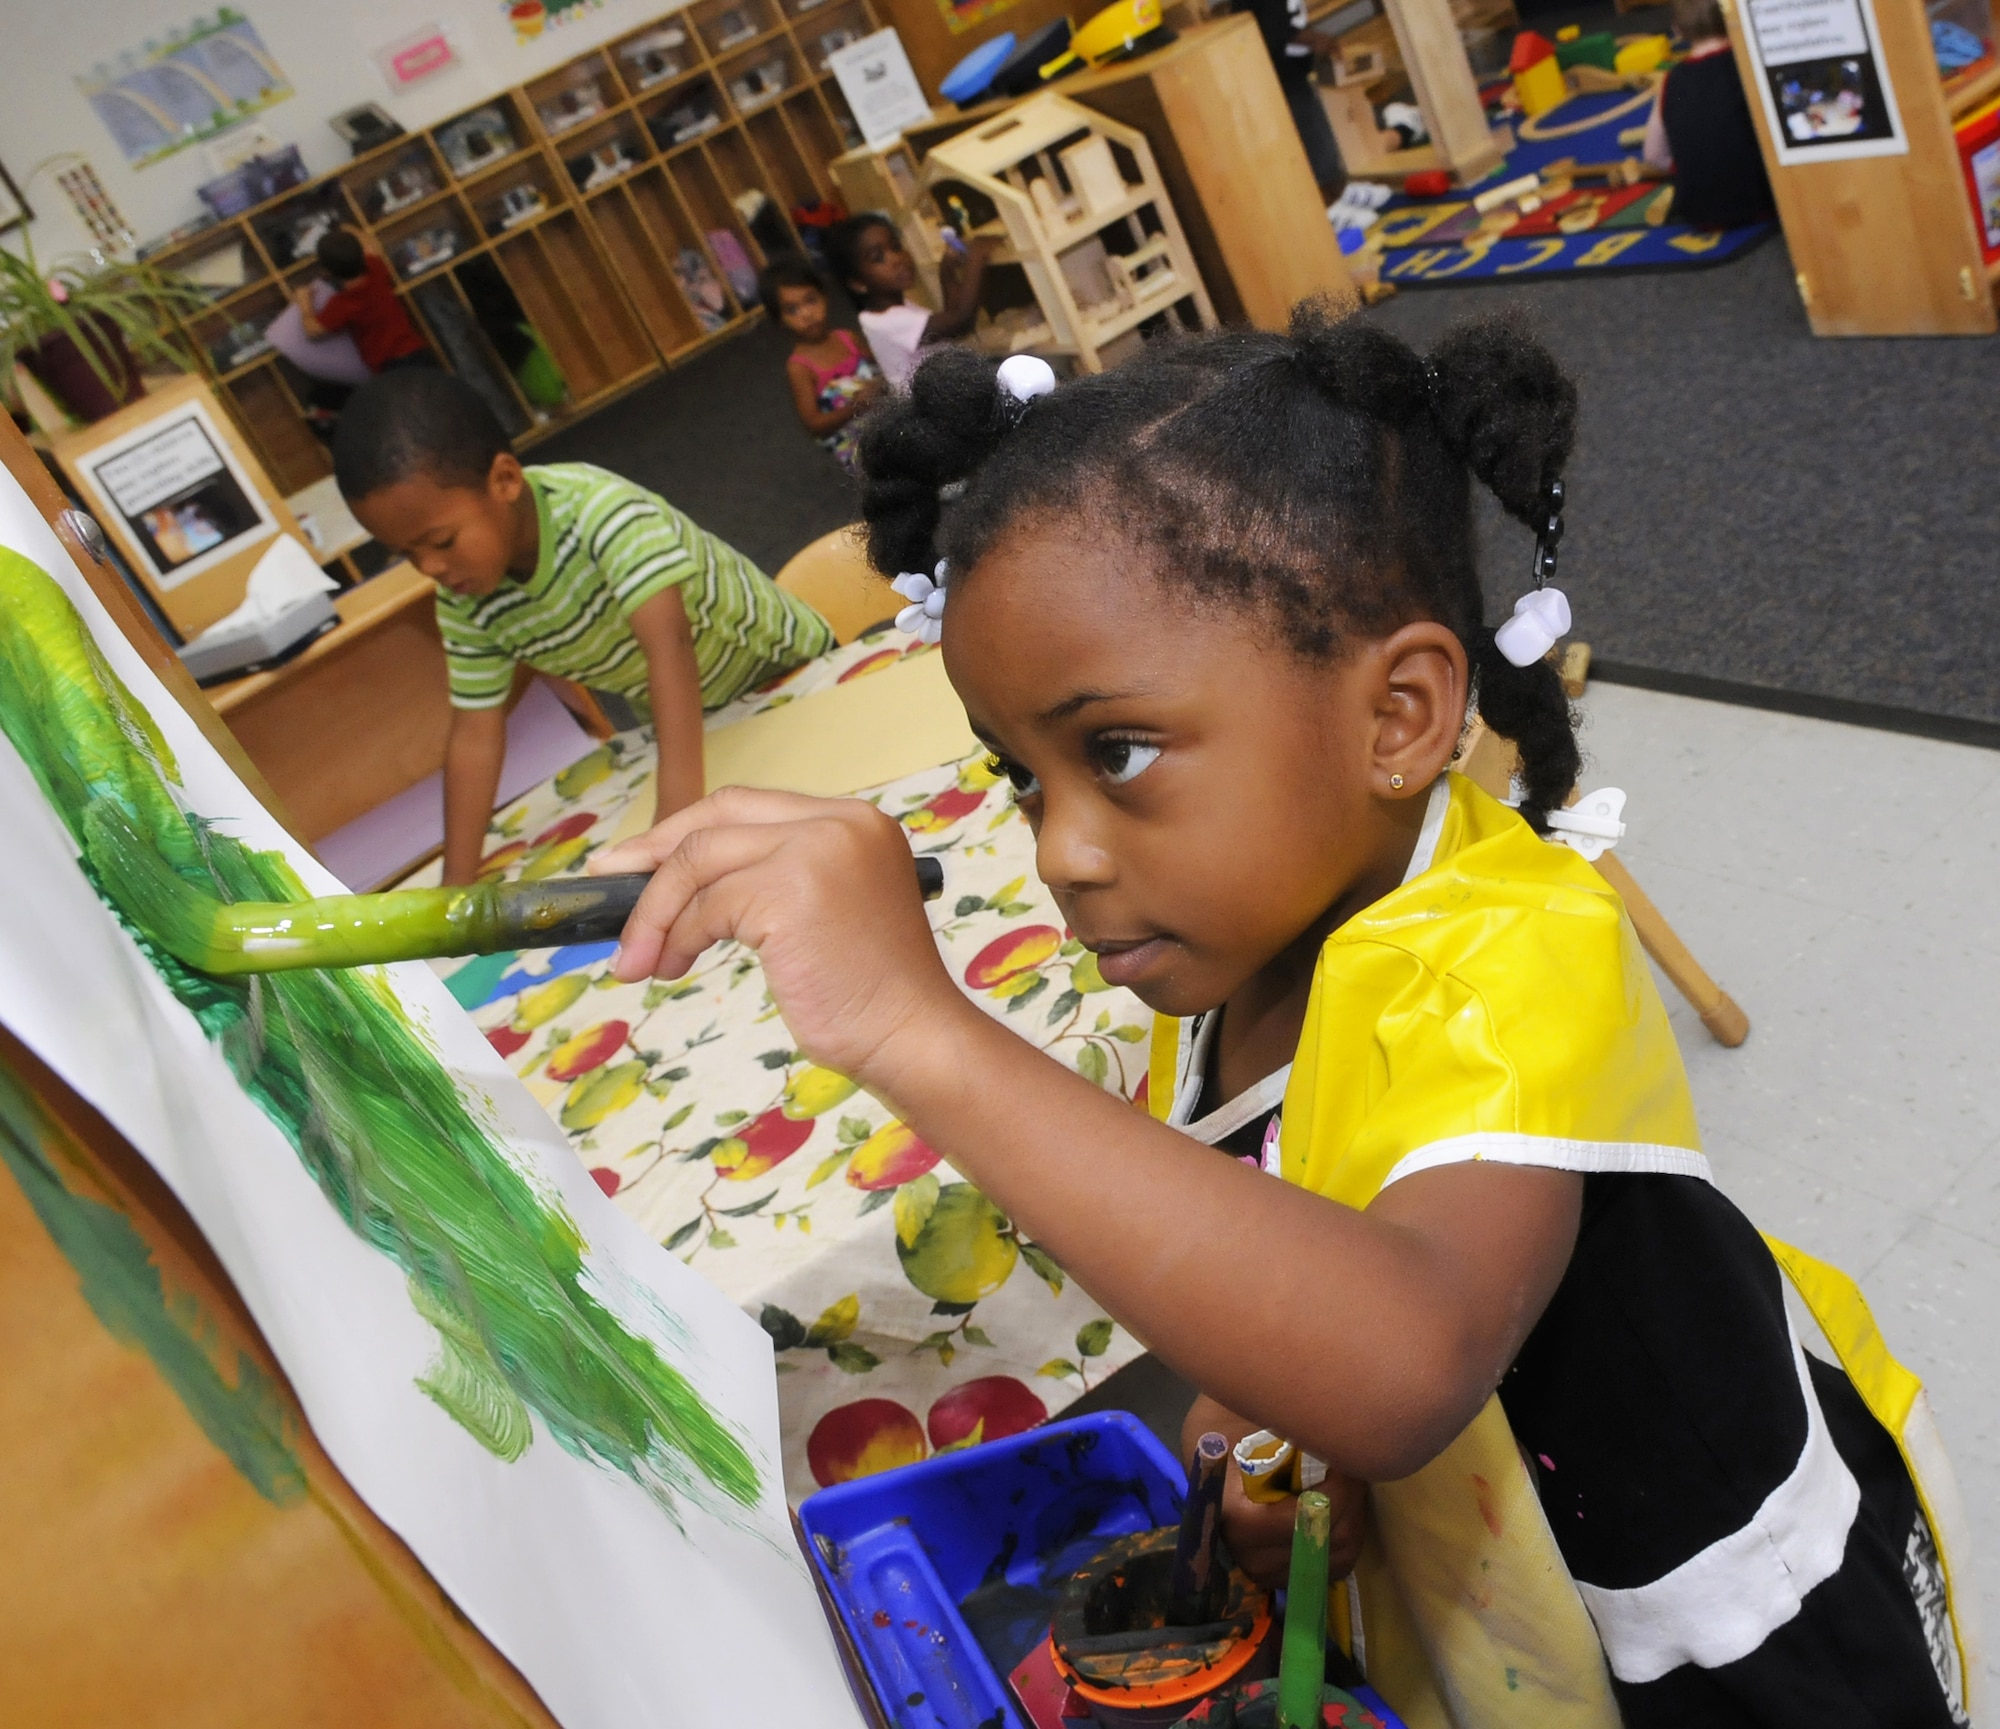 Brisha Smith paints at an easel in the 3-4 year old room at Child Development Center West. U. S. Air Force photo by Sue Sapp